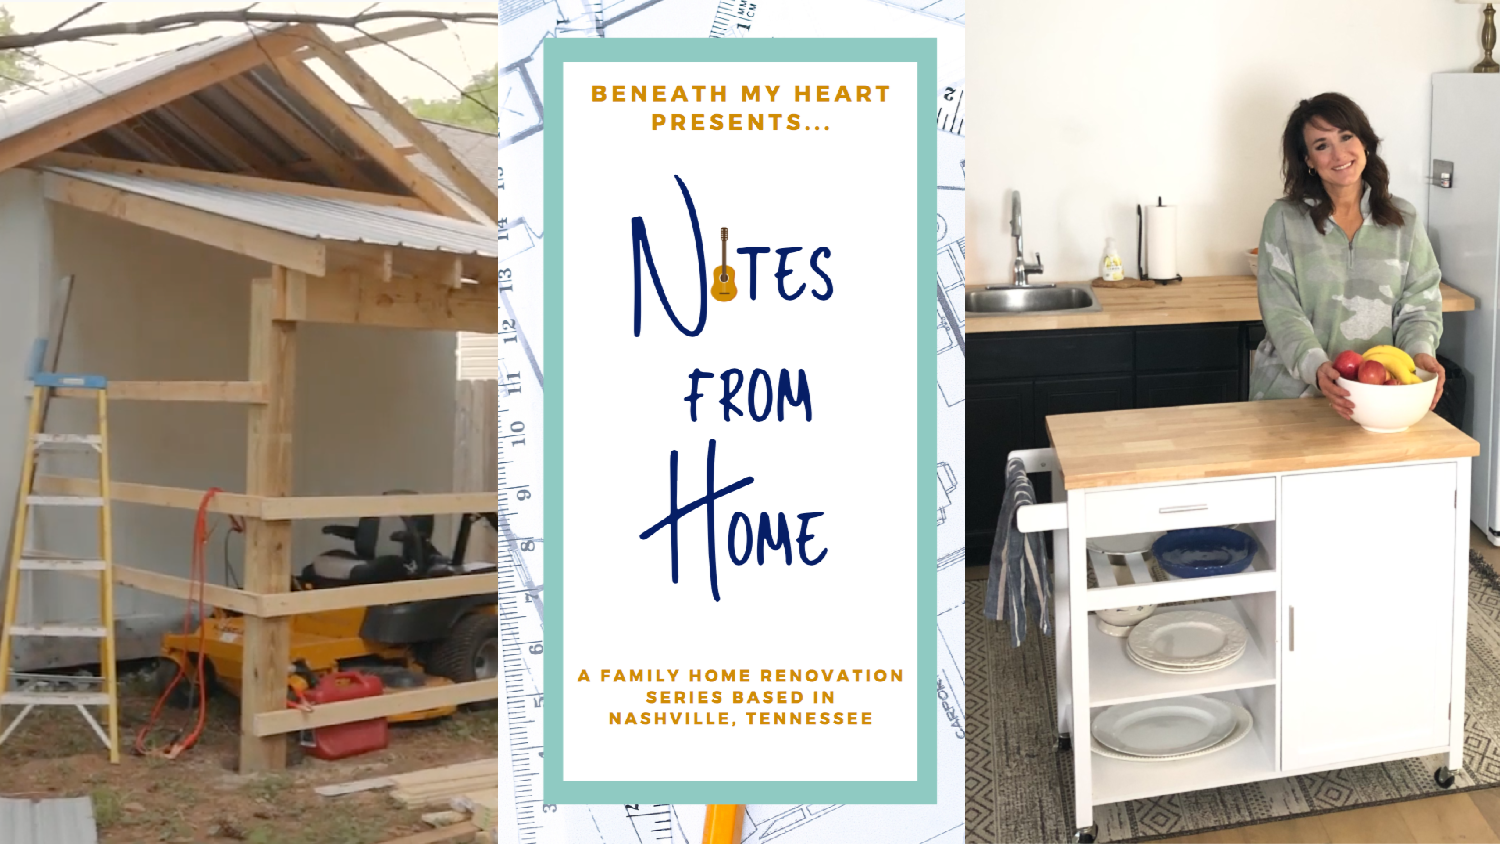 NEW EPISODE of Notes from Home!